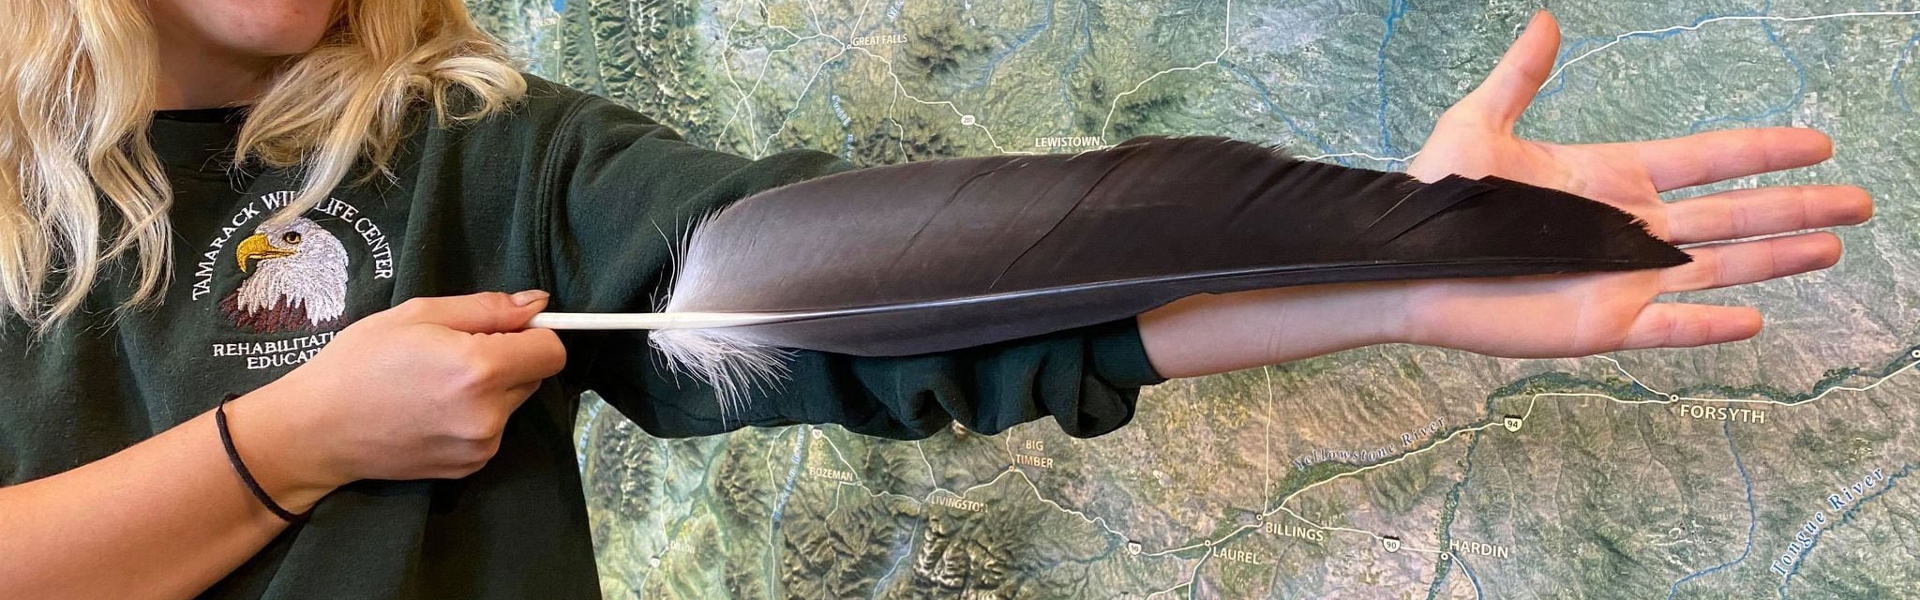 holding a bald eagle wing